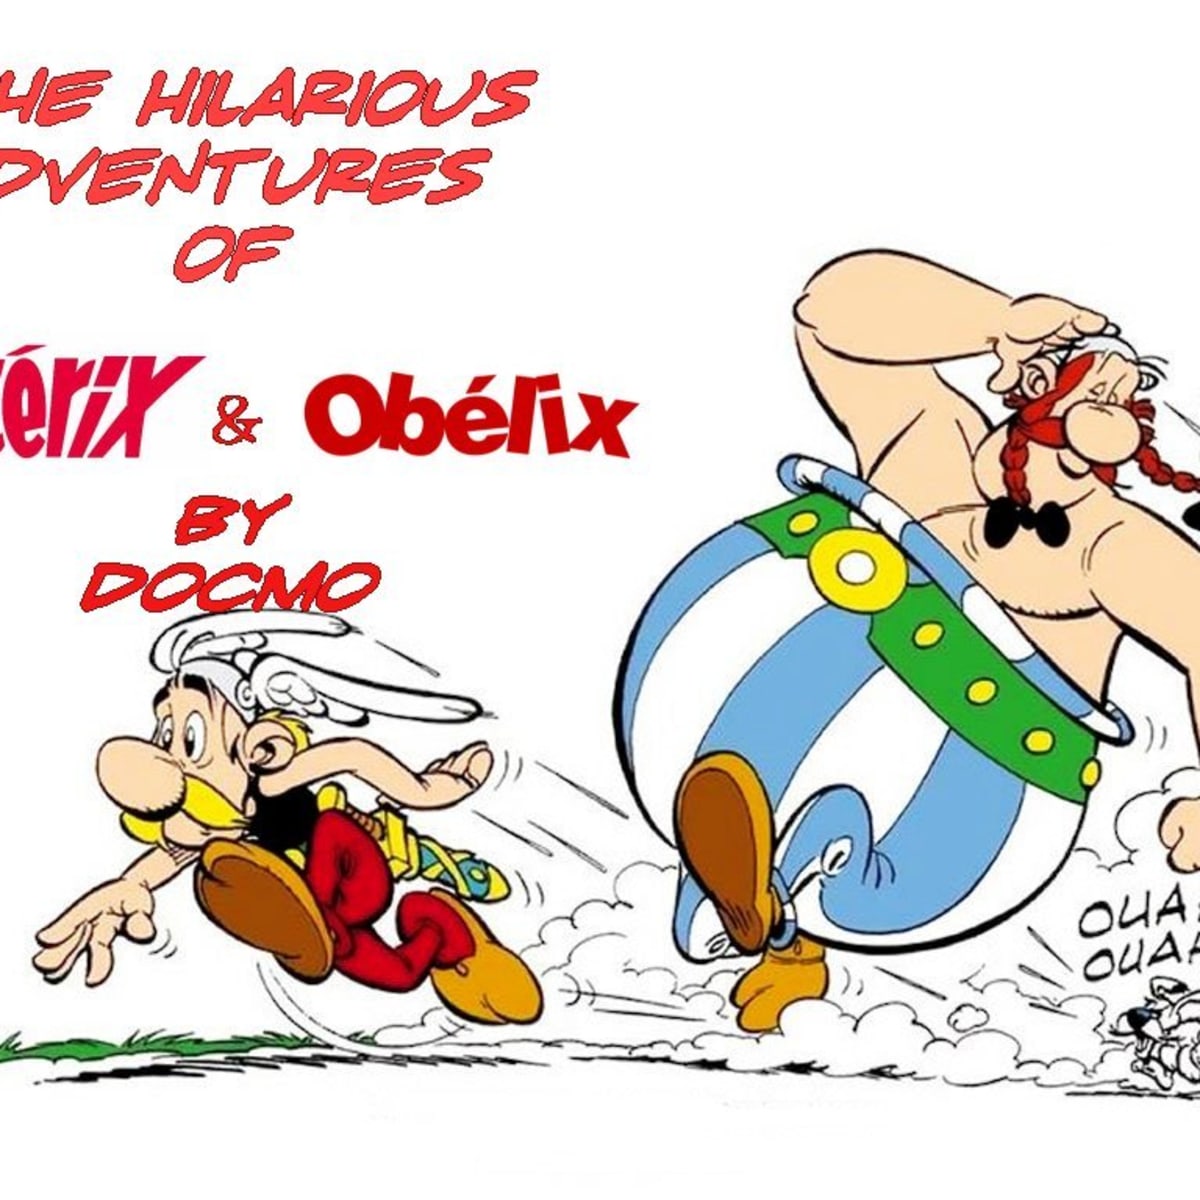 Hilarious Adventures Of Asterix And Obelix - Hubpages